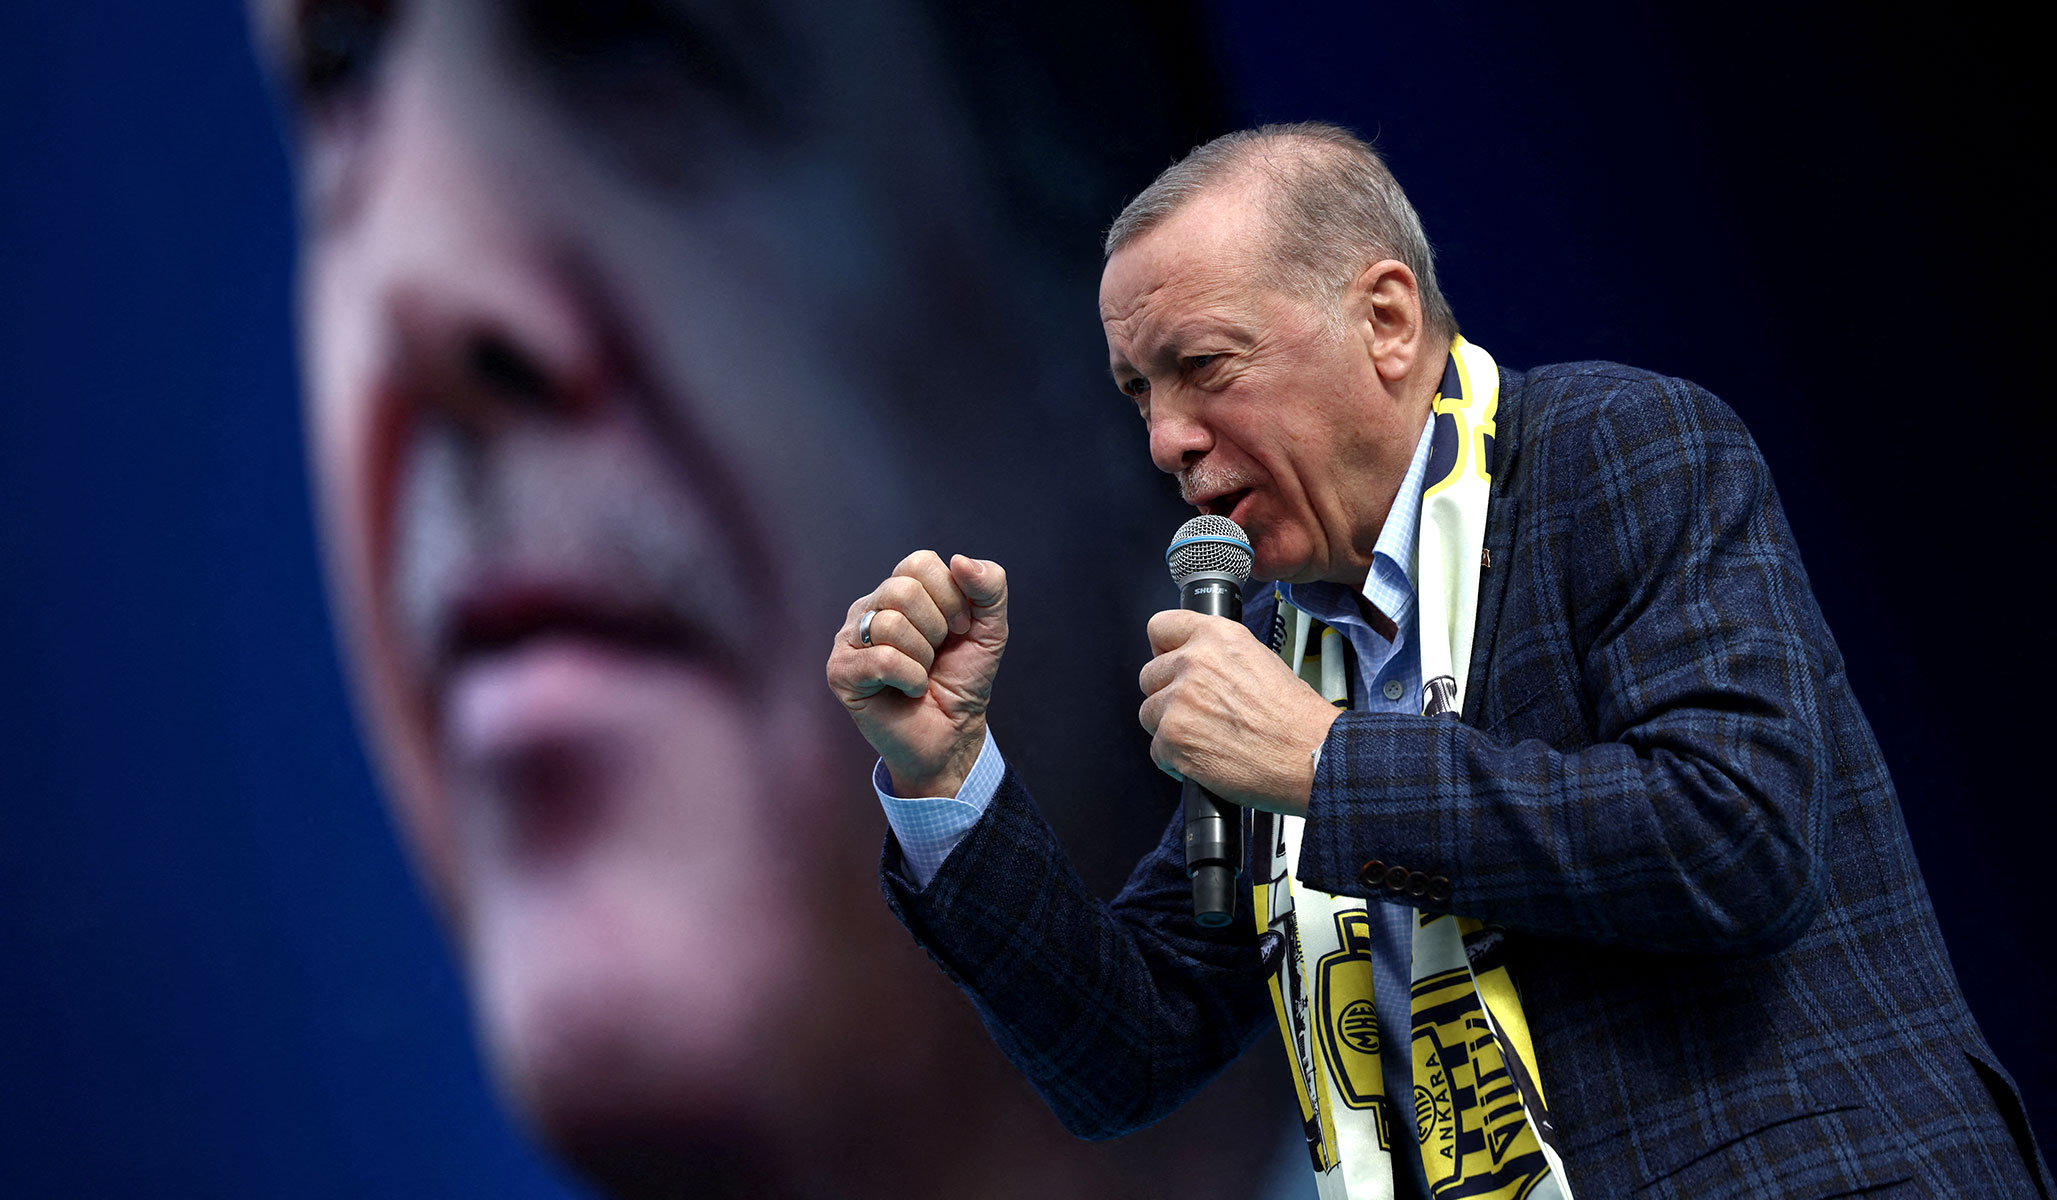 Turkey’s Election Scenarios: The Good, the Bad, and the Scary | National Review